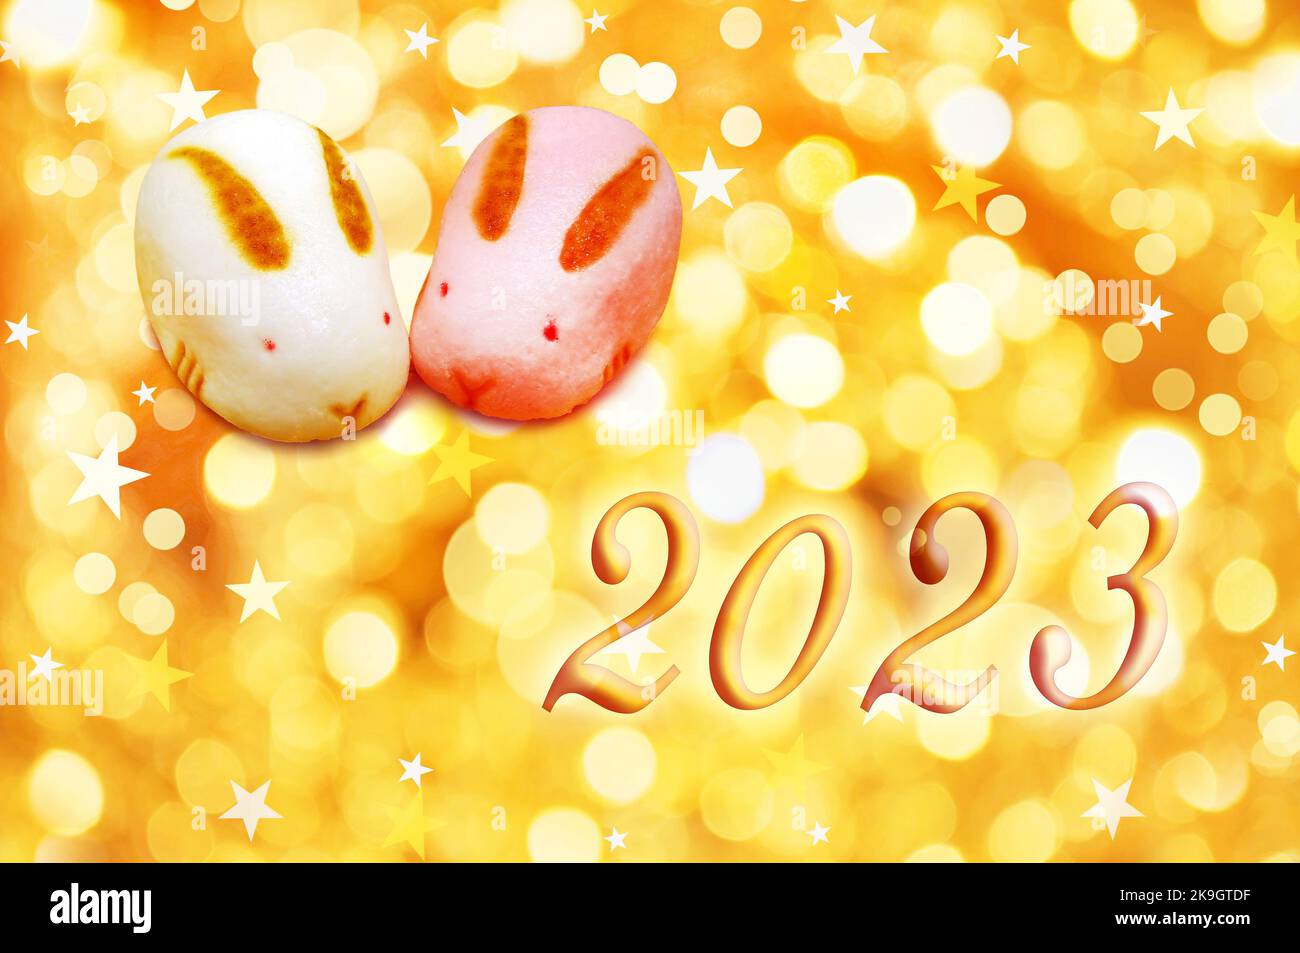 2023, year of the rabbit. Japanese greeting card with rabbit shaped pastries and golden holiday lights Stock Photo